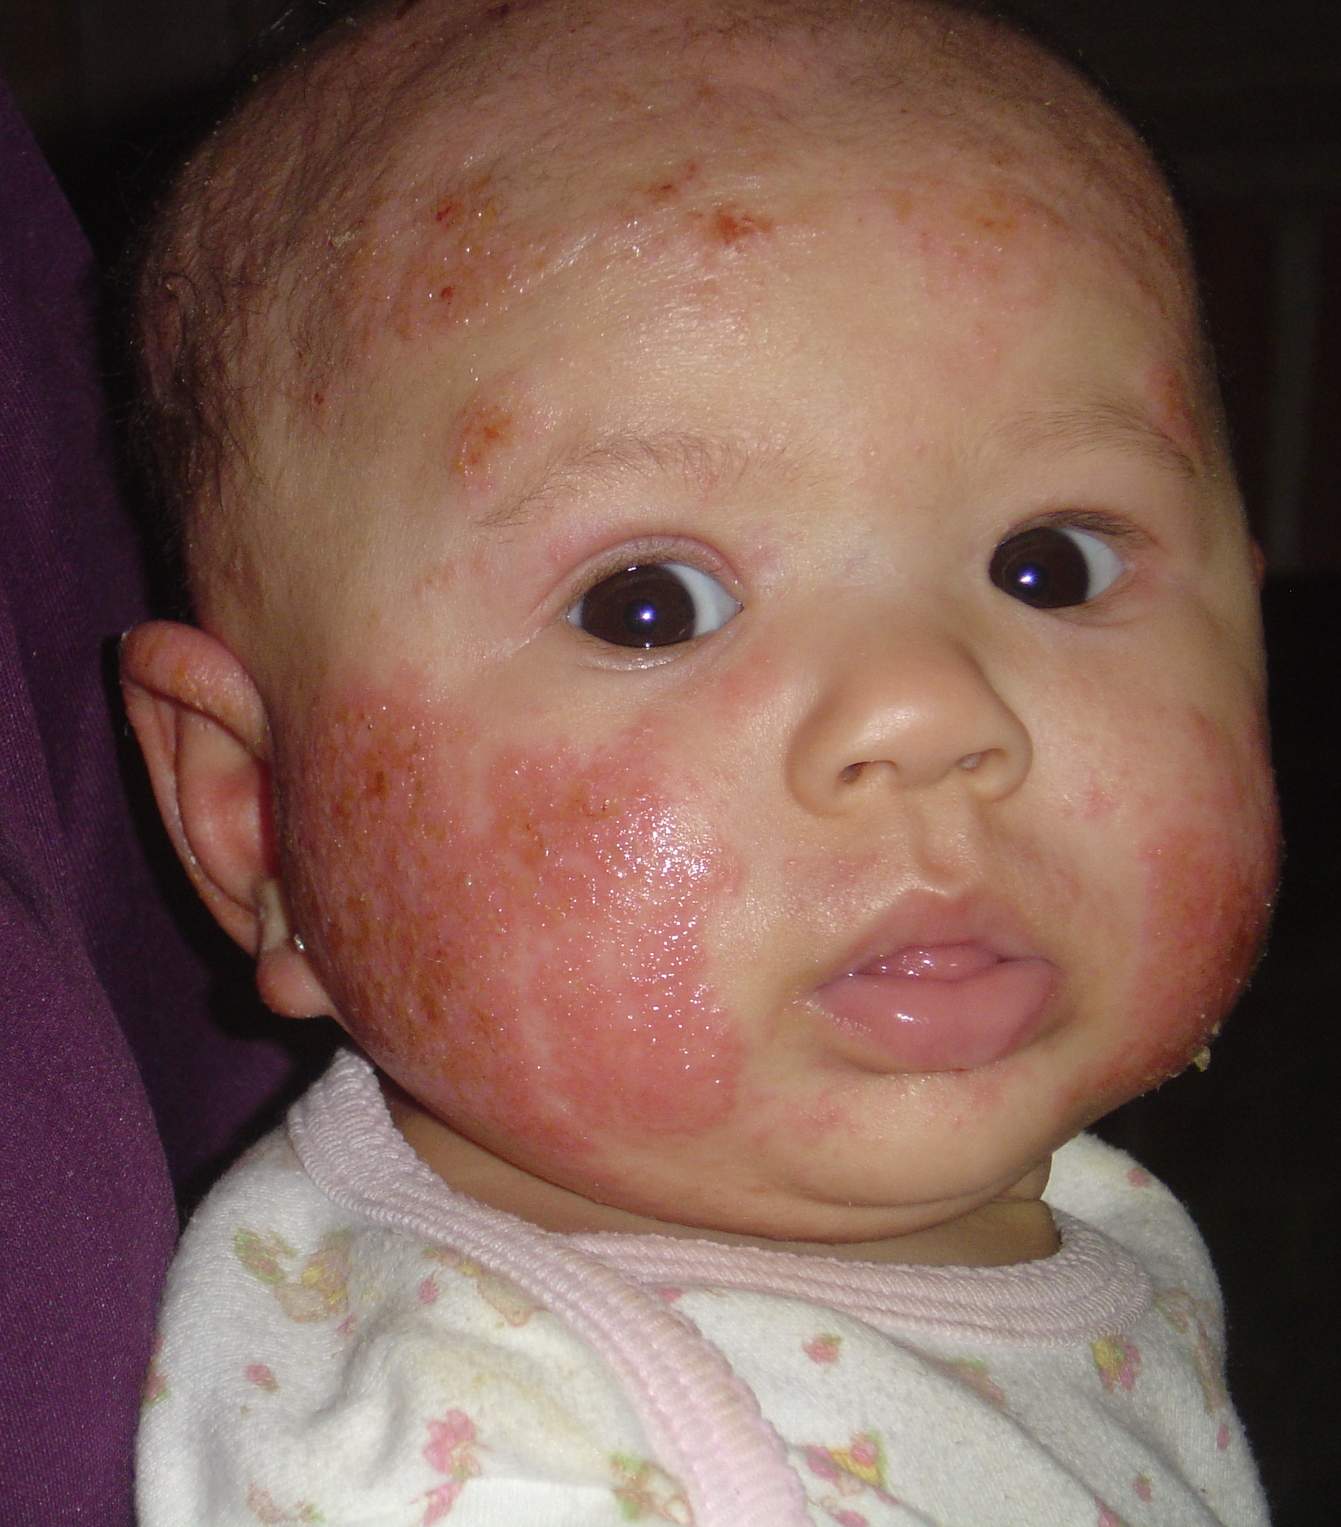 Baby Acne Cure and Treatment: Baby Eczema Pictures : What Looks Like ...